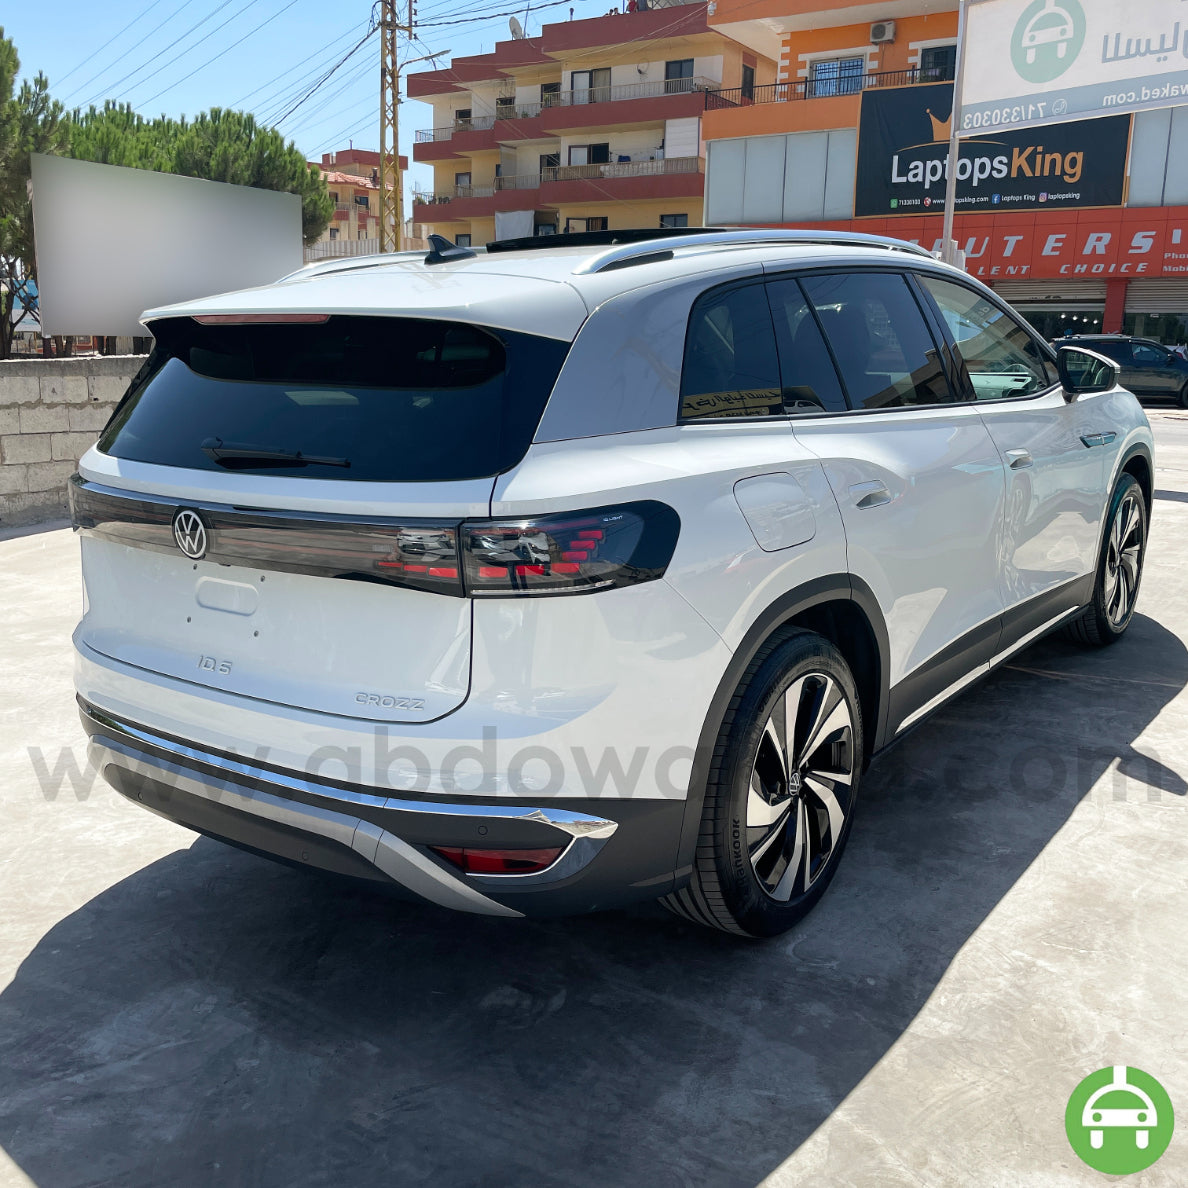 VW ID6 Crozz Pure+ 2022 7-Seater White Color 601km Range/Charge Fully Electric Car (New - 0KM)